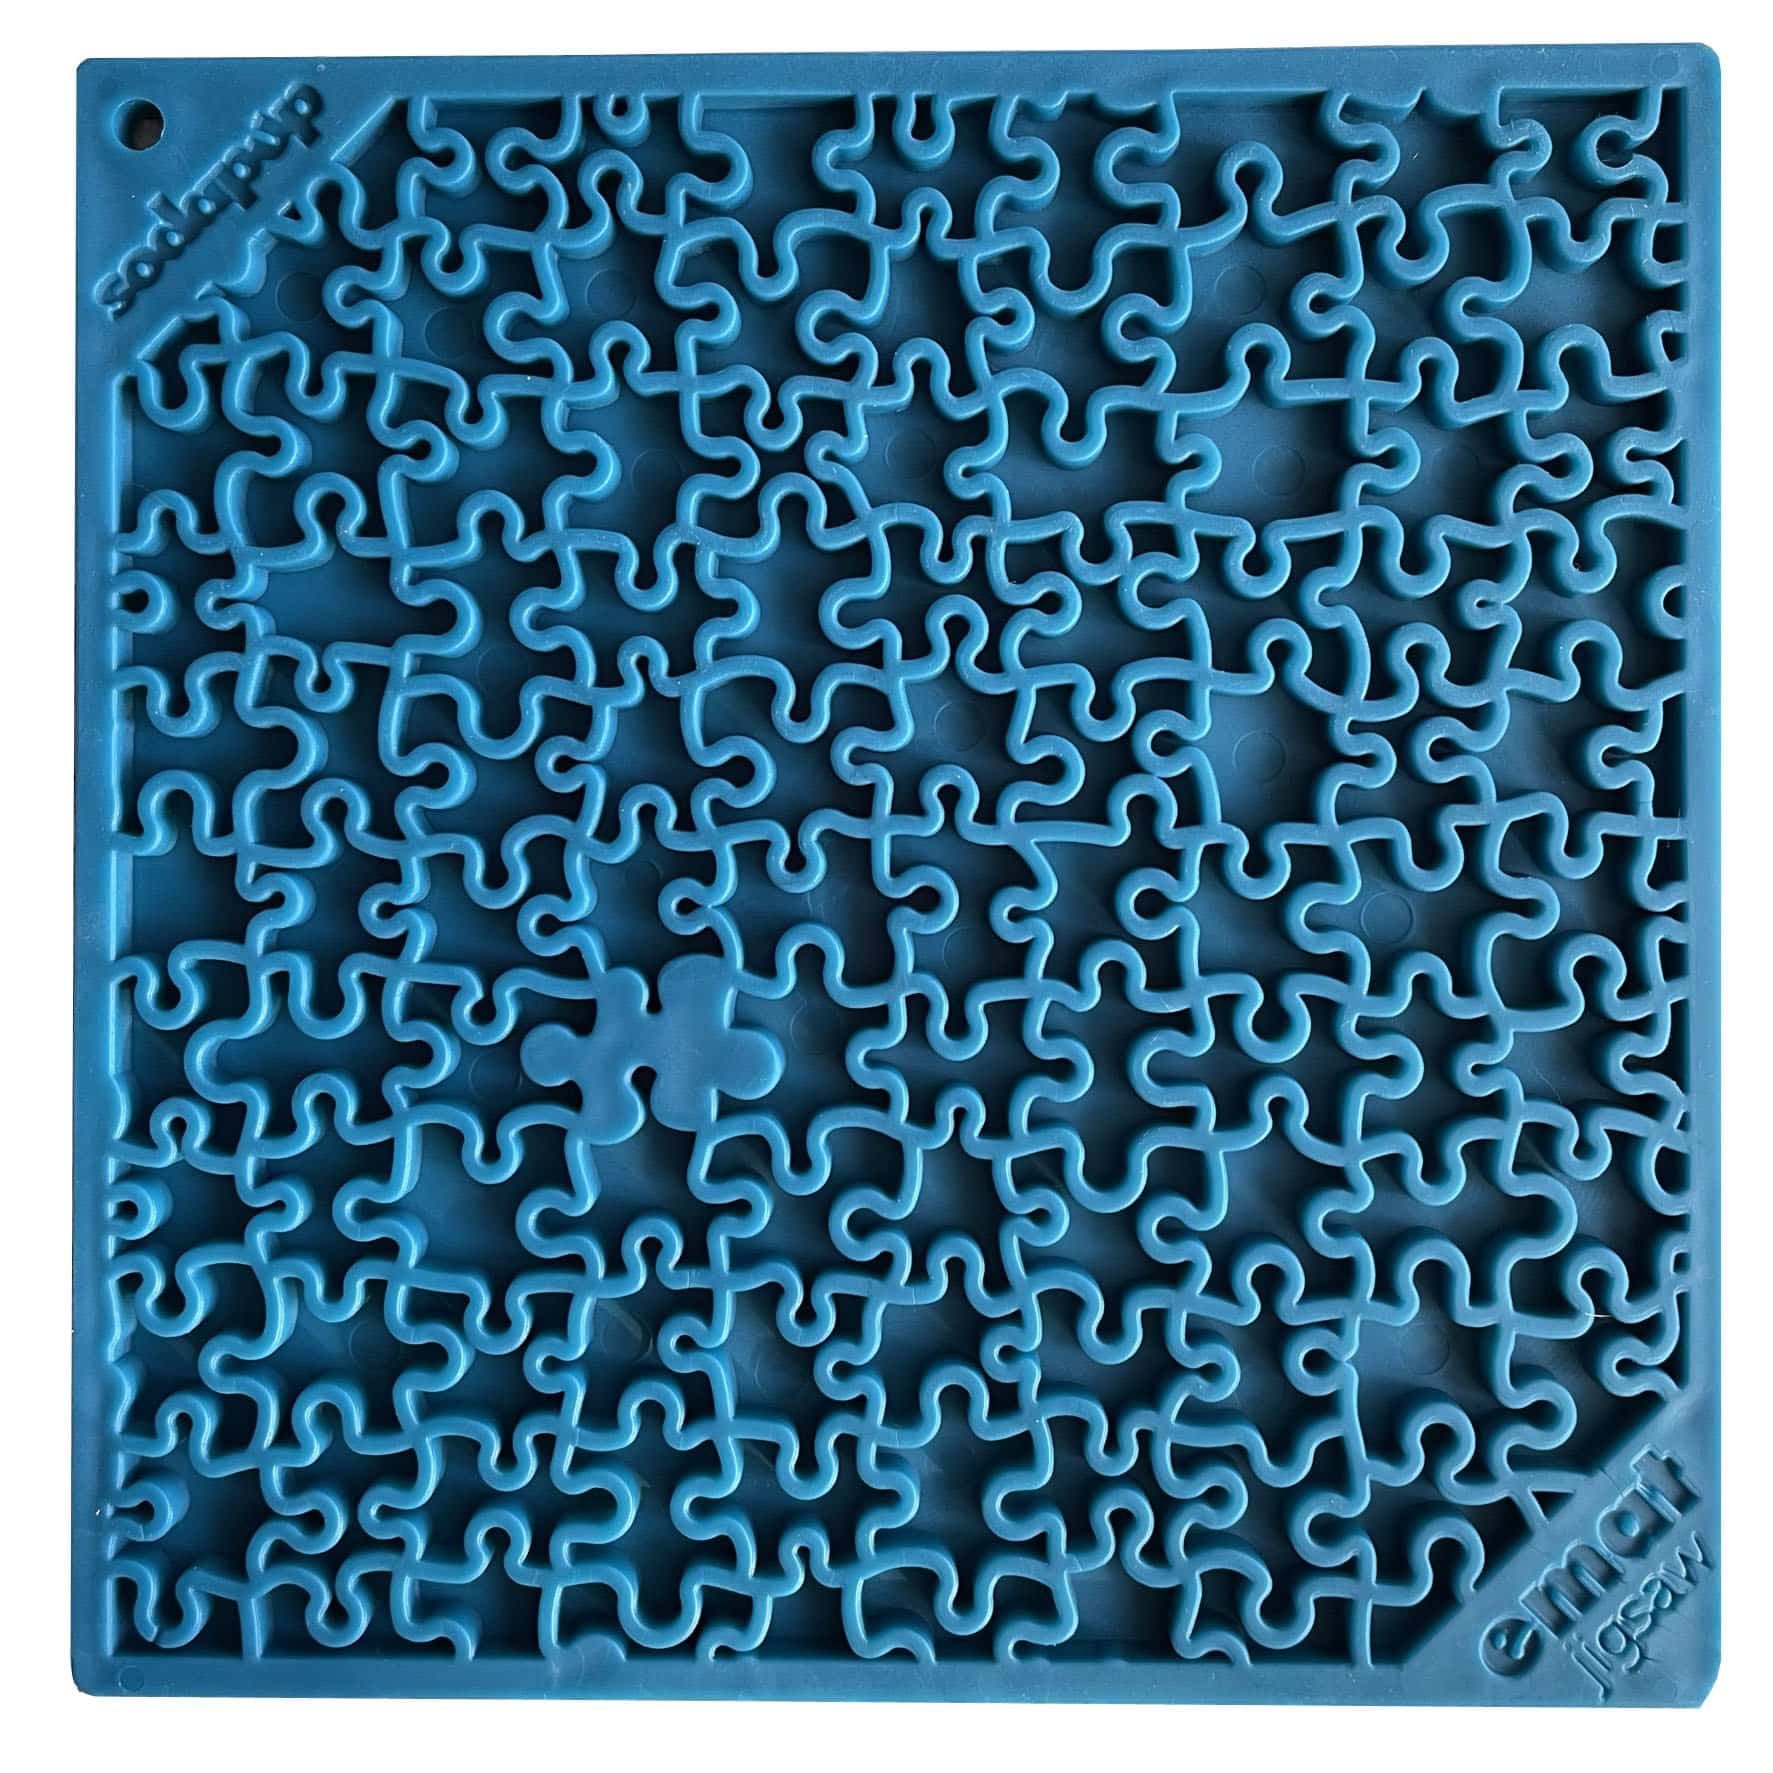 Enrichment Lick Mat For Dogs